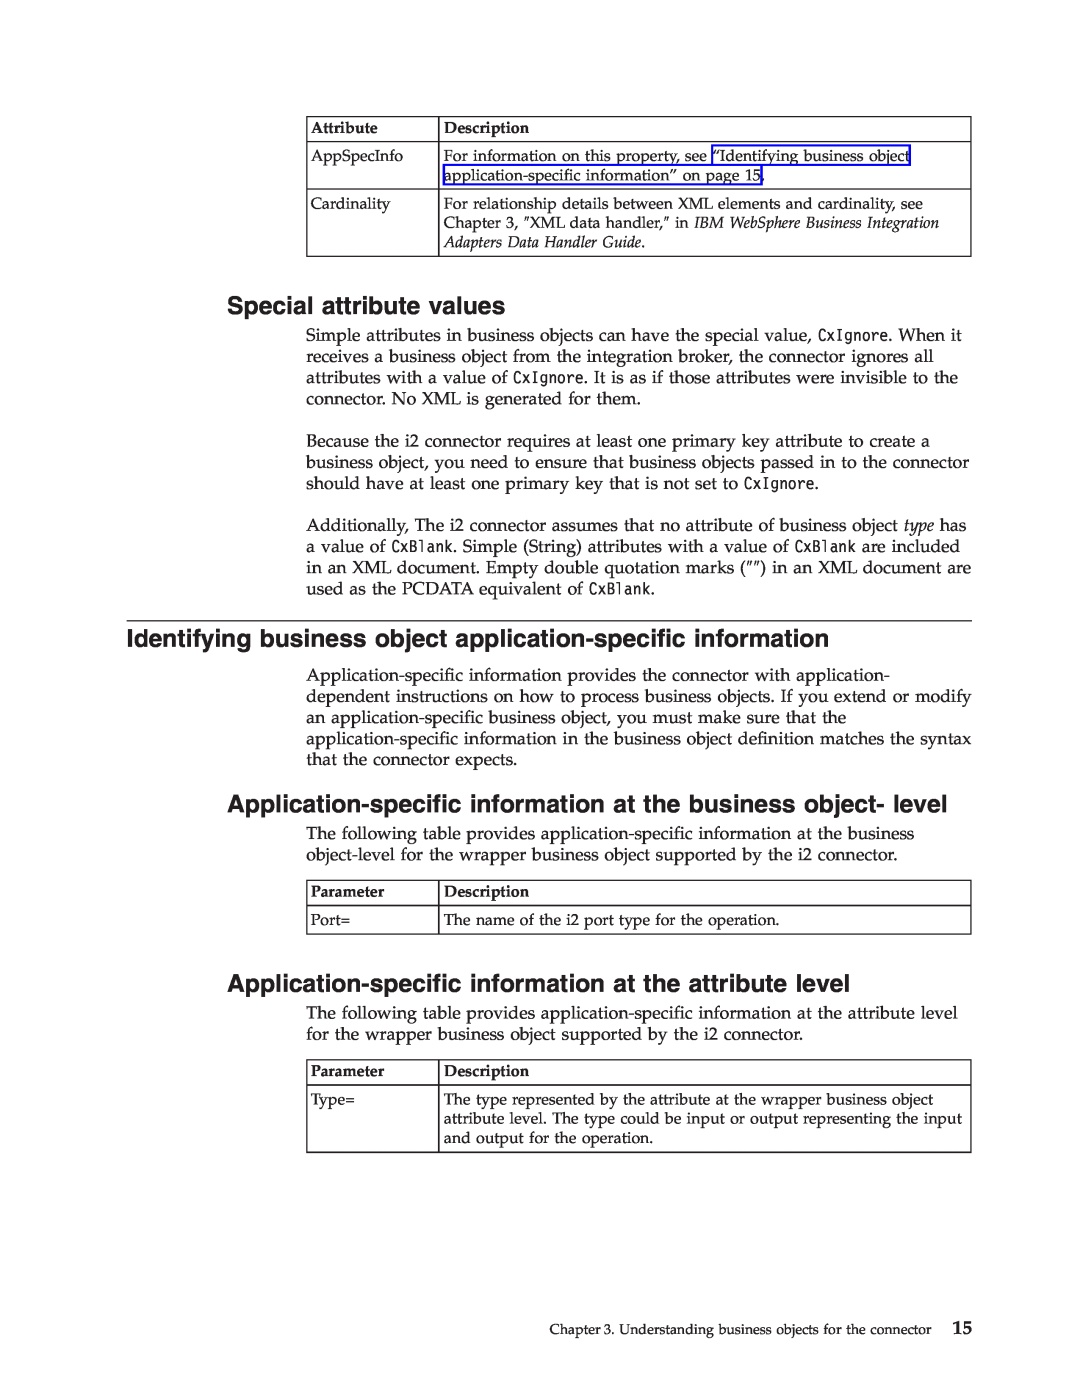 IBM WebSphere Business Integration Adapter manual Special attribute values 